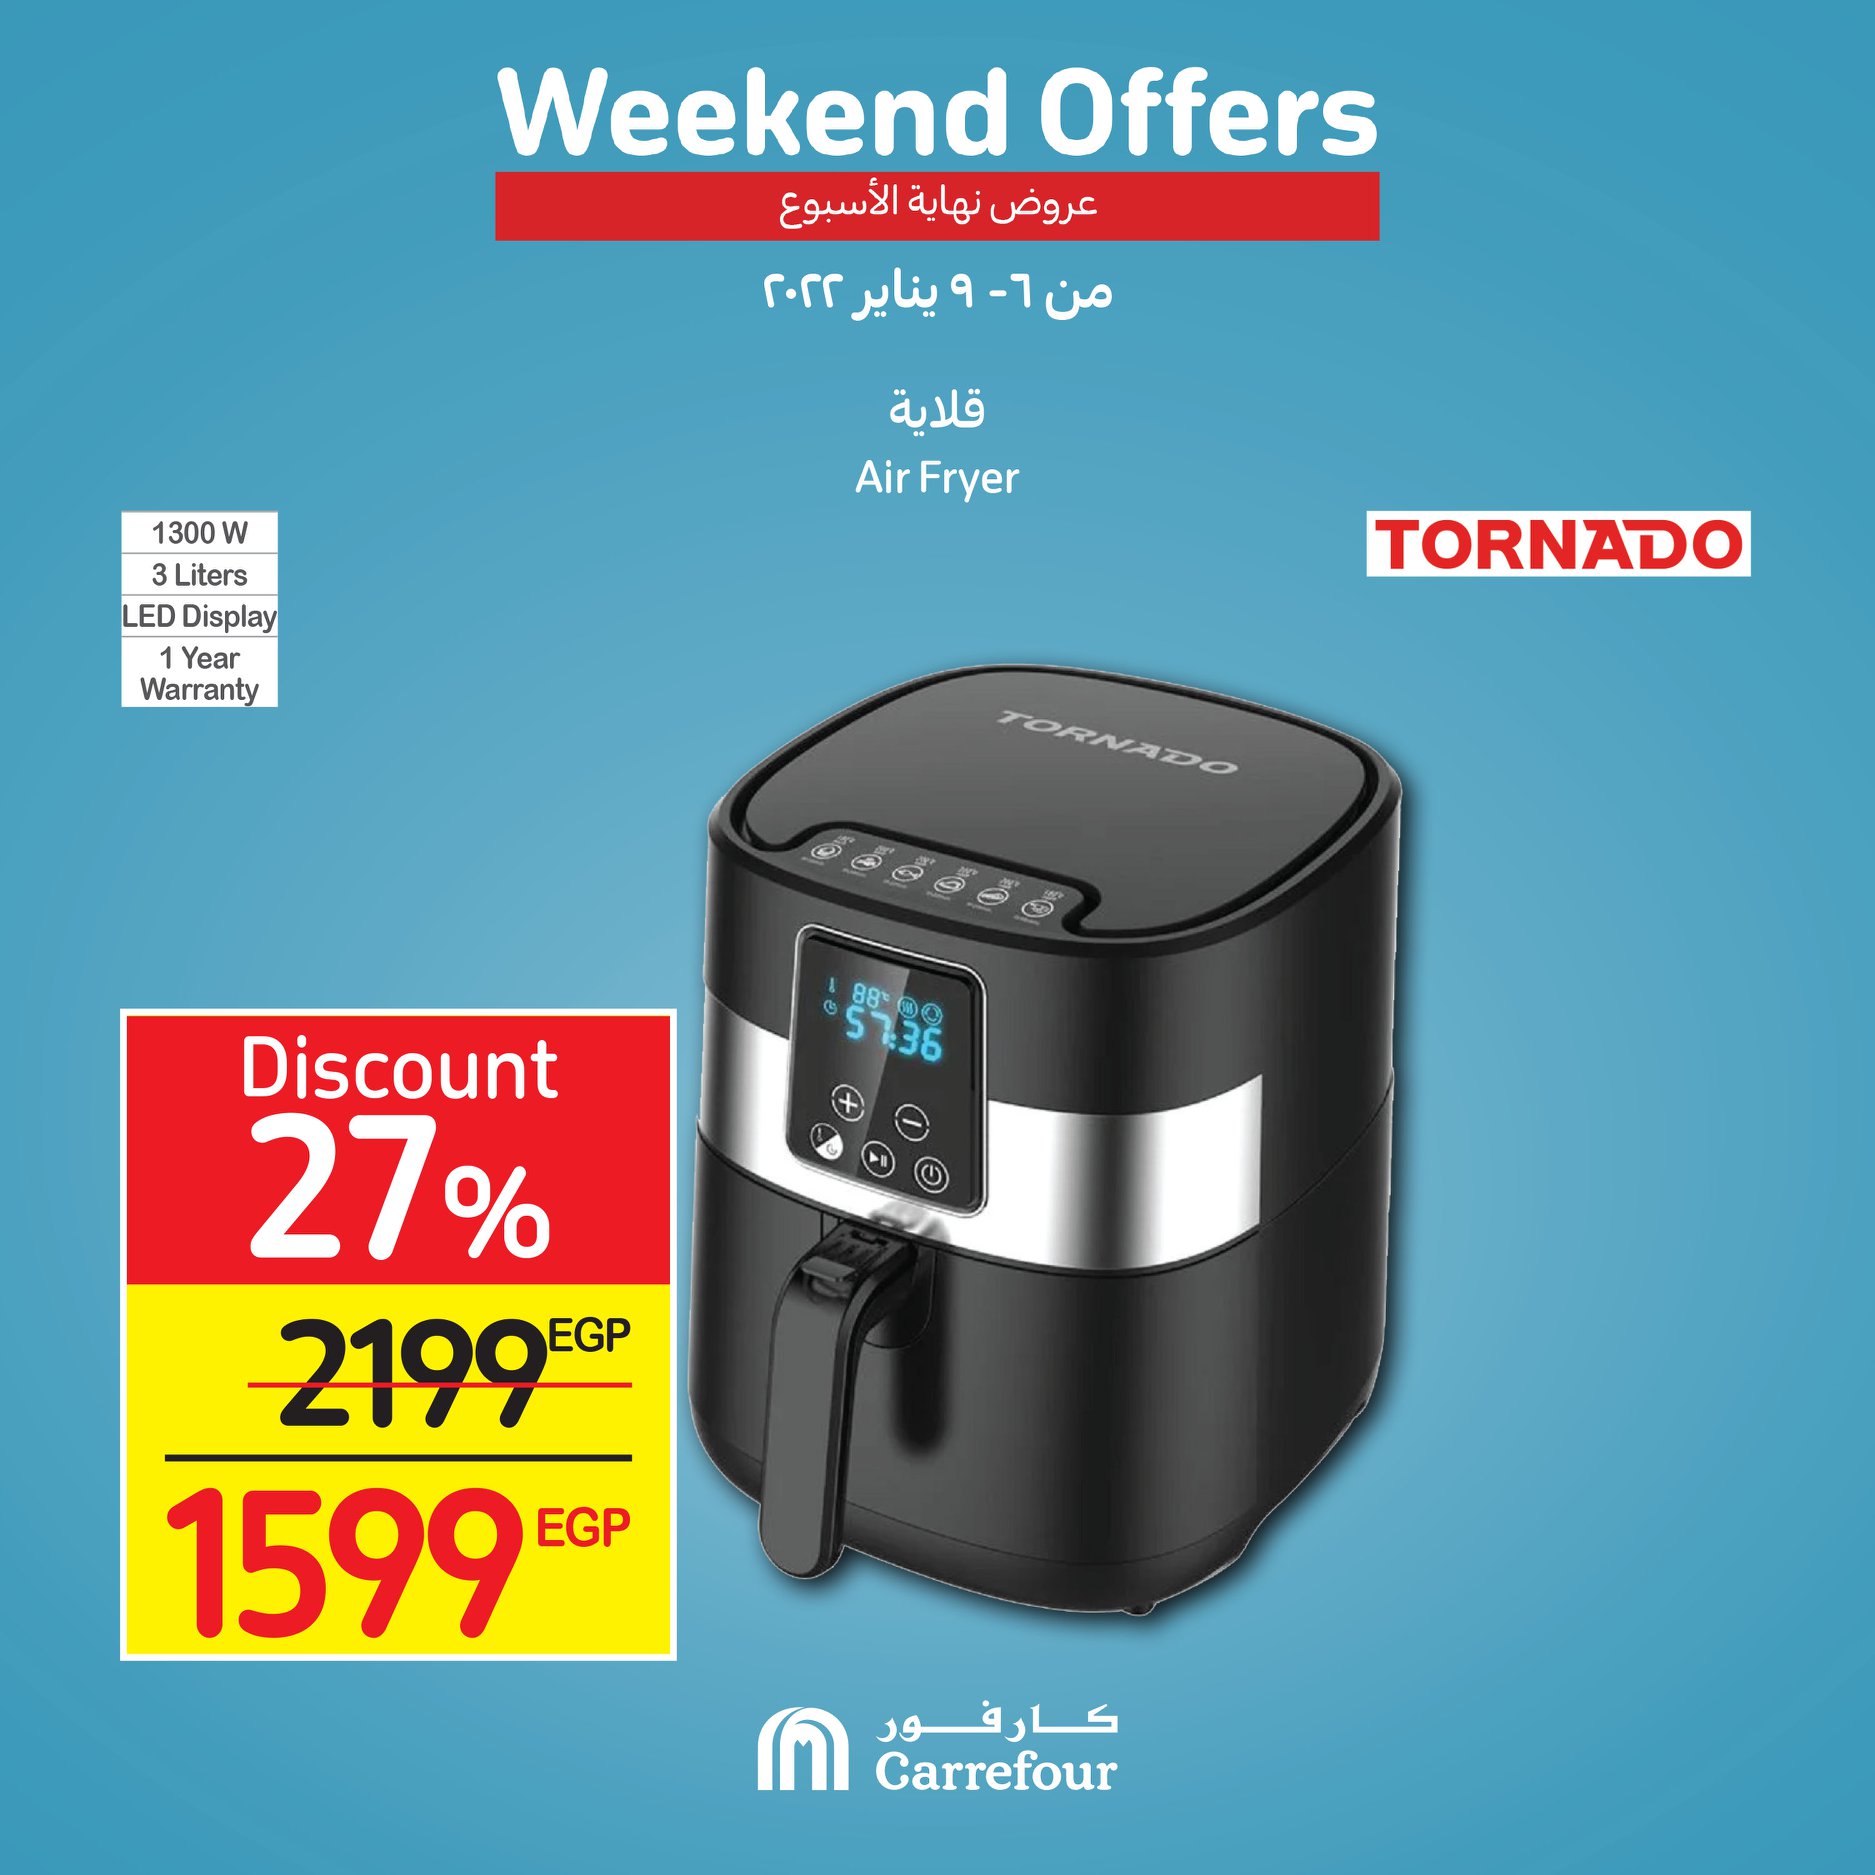 Now, the strongest offers and surprises from Carrefour, half-price discounts, at Weekend, until January 16, 17